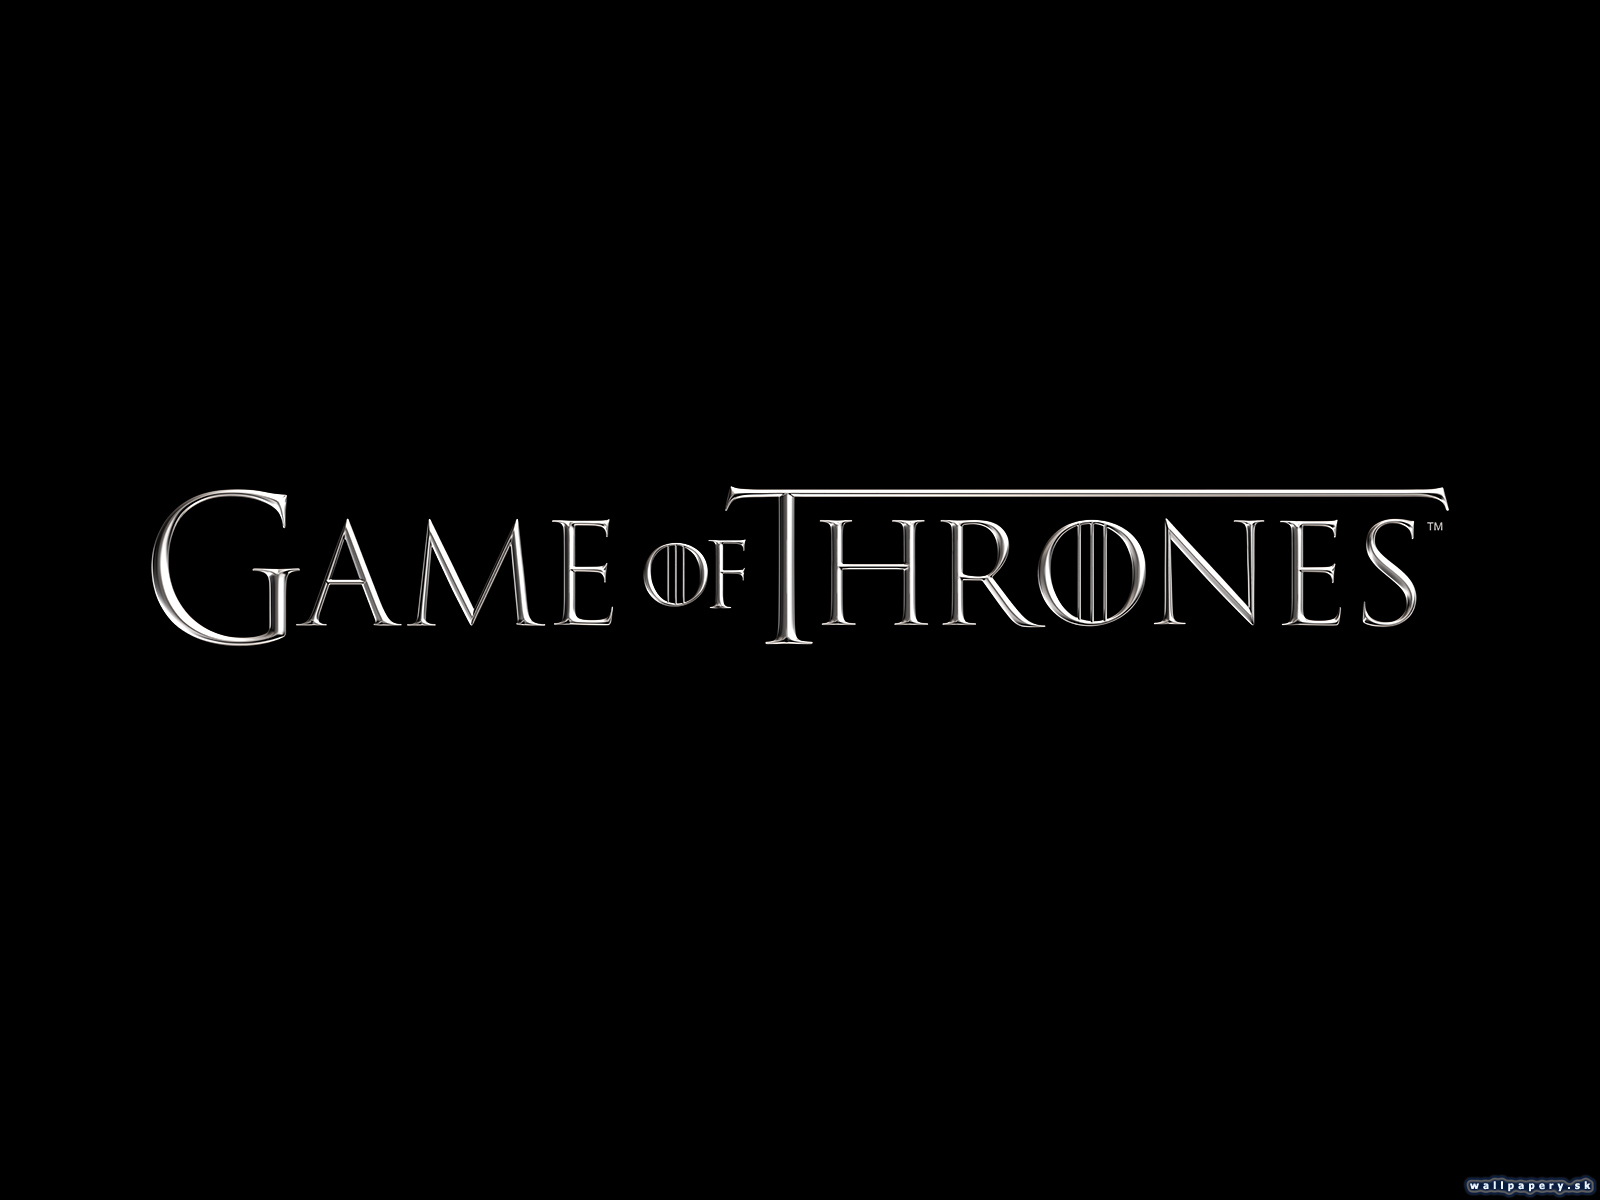 Game of Thrones - wallpaper 4